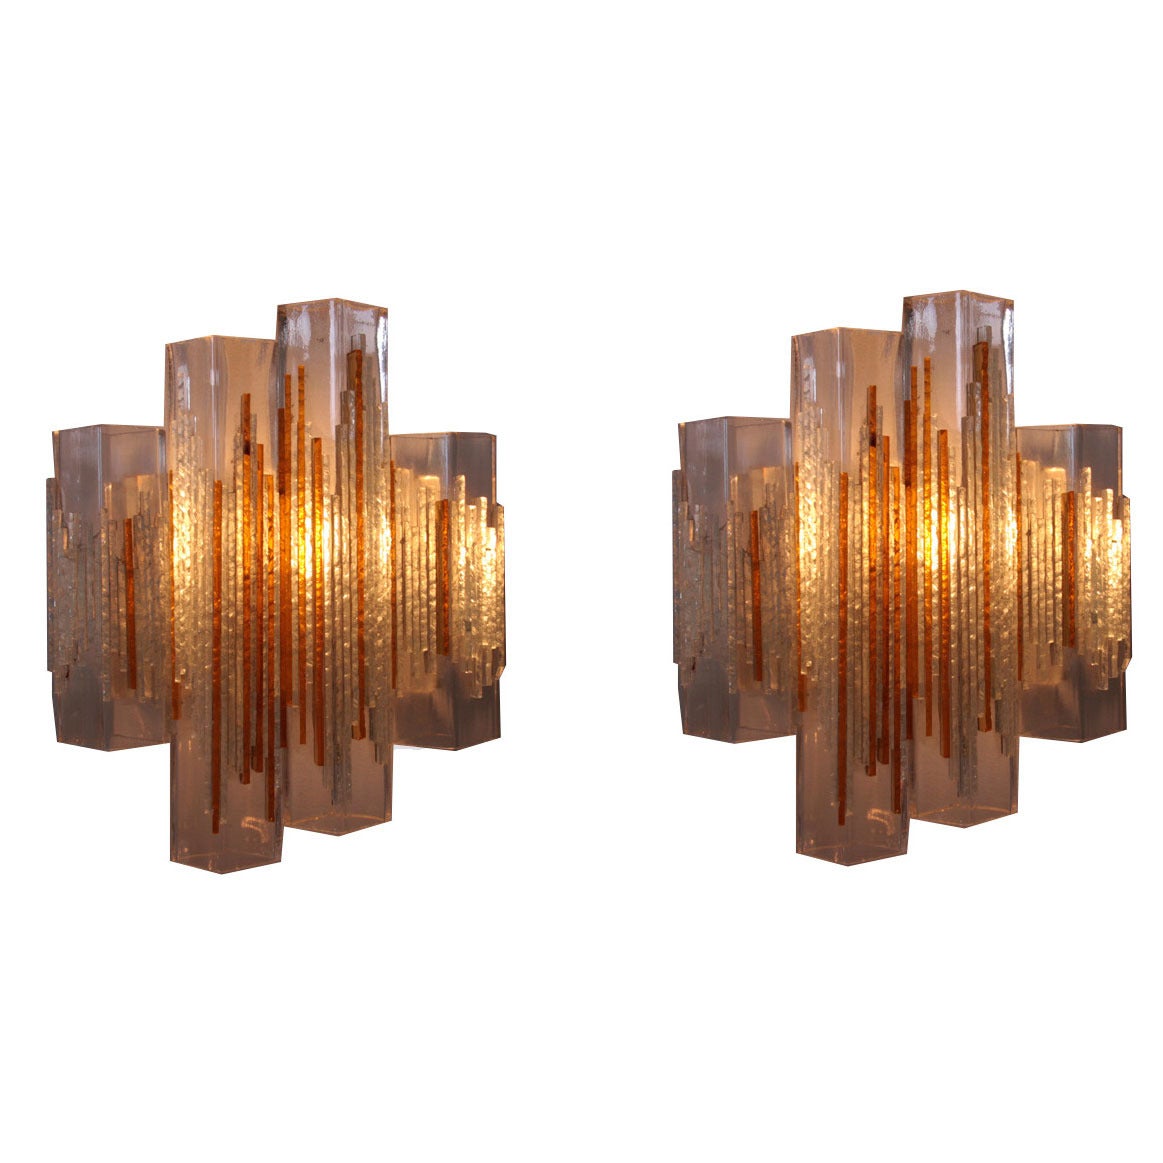 Pair of Poliarte Cubic Glass Wall Sconces, Italy, 1960s For Sale